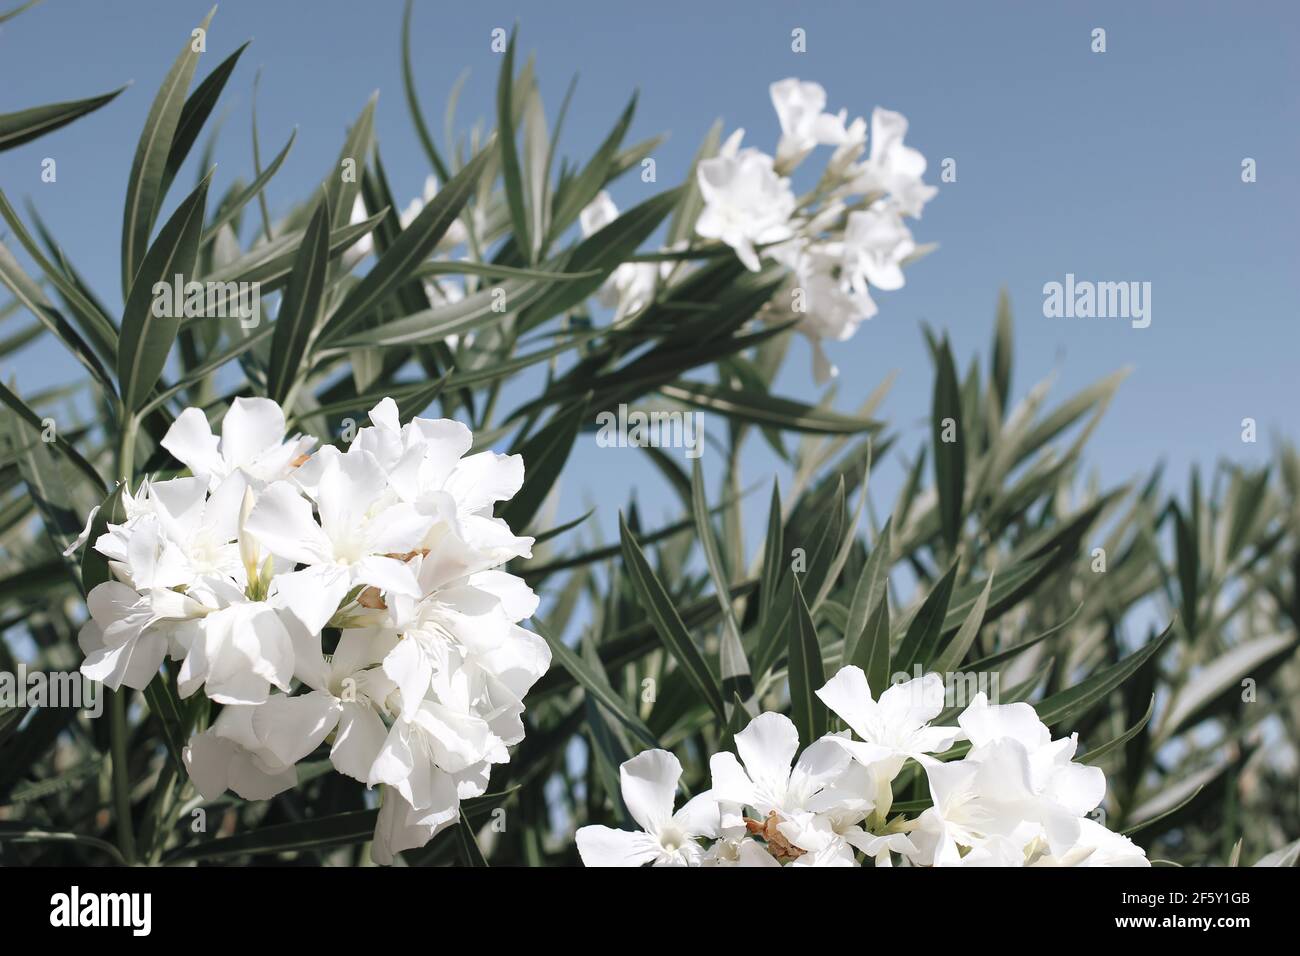 Close-up of blooming oleander bush with white blossoms, green leaves against blue summer sky in sunlight. Mediterranean bush, flora. Garden in Spain. Stock Photo